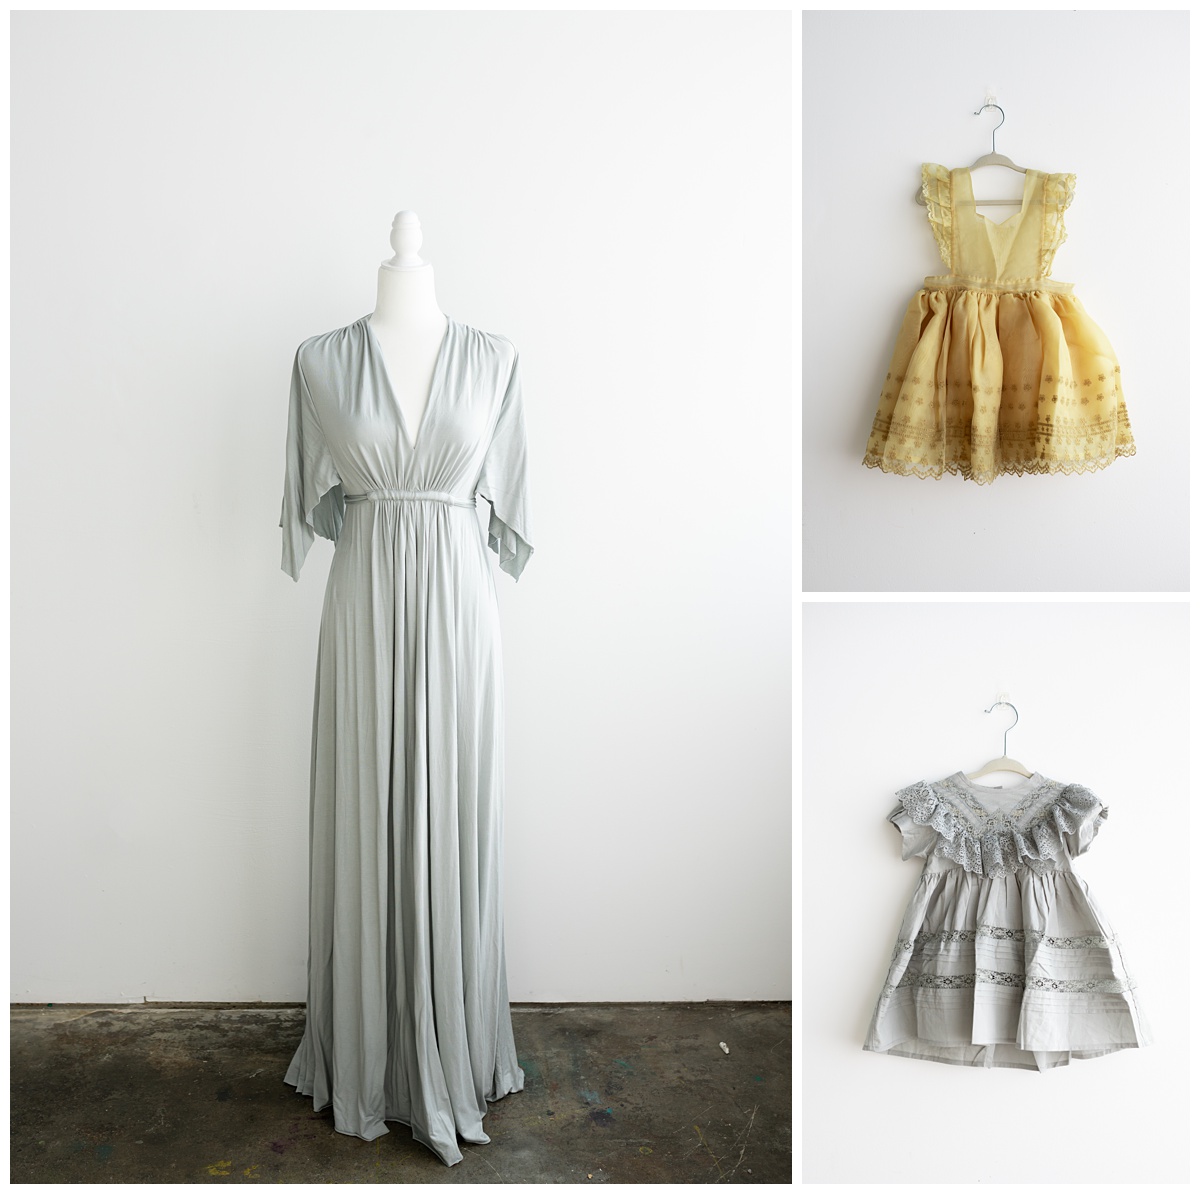 Yellow noralee tulle dress and grey lacy dress on white wall and blue rachel pally dress